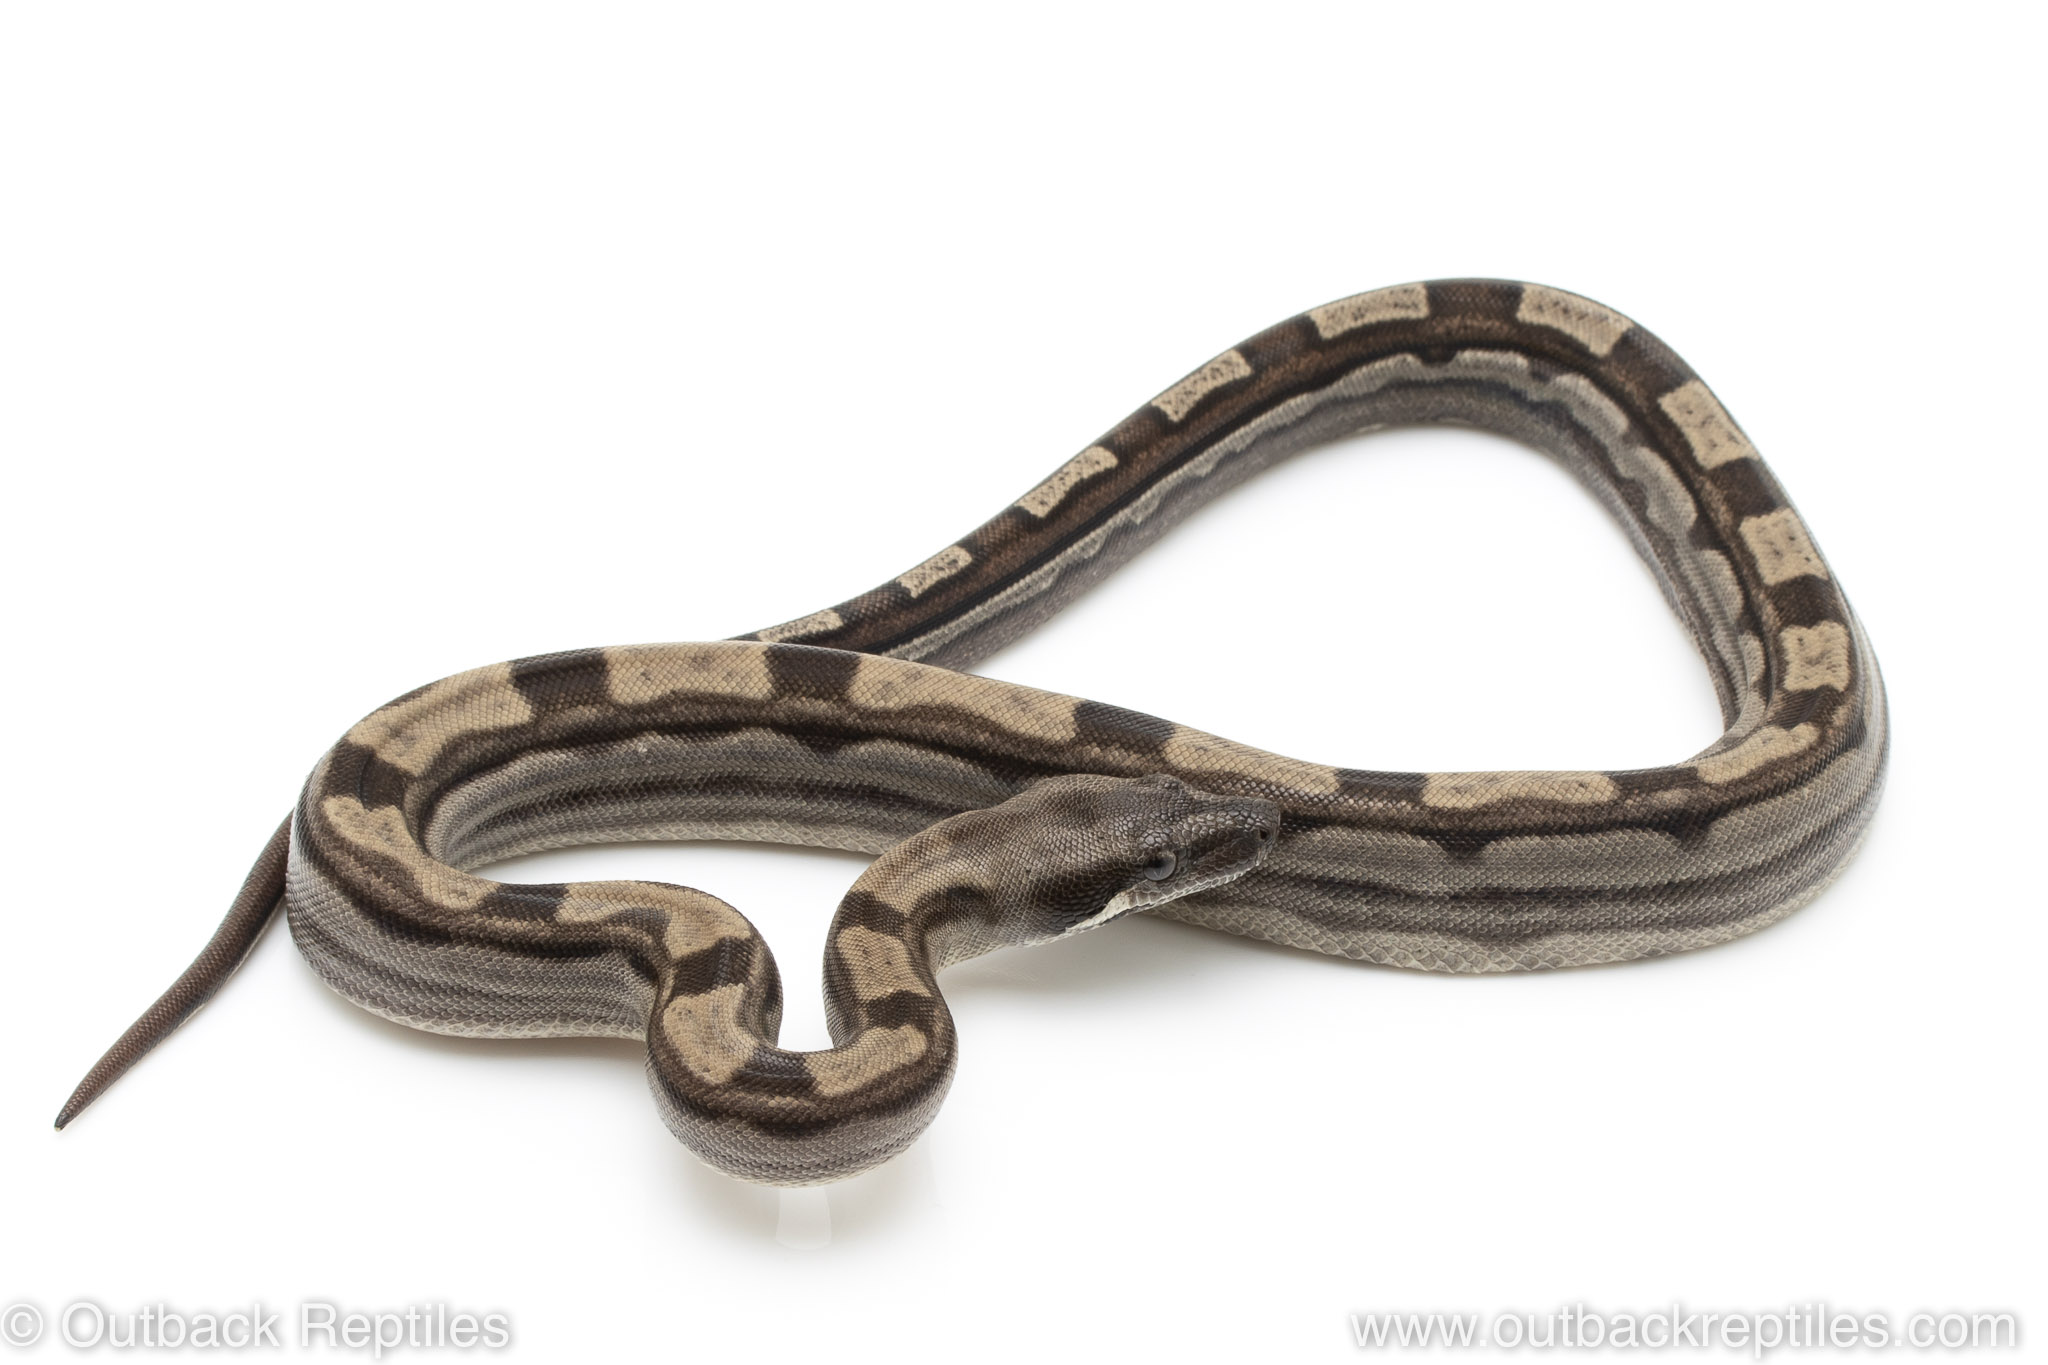 Colombian Redtail Boa For Sale Outback Reptiles,Grape Leaves Jar